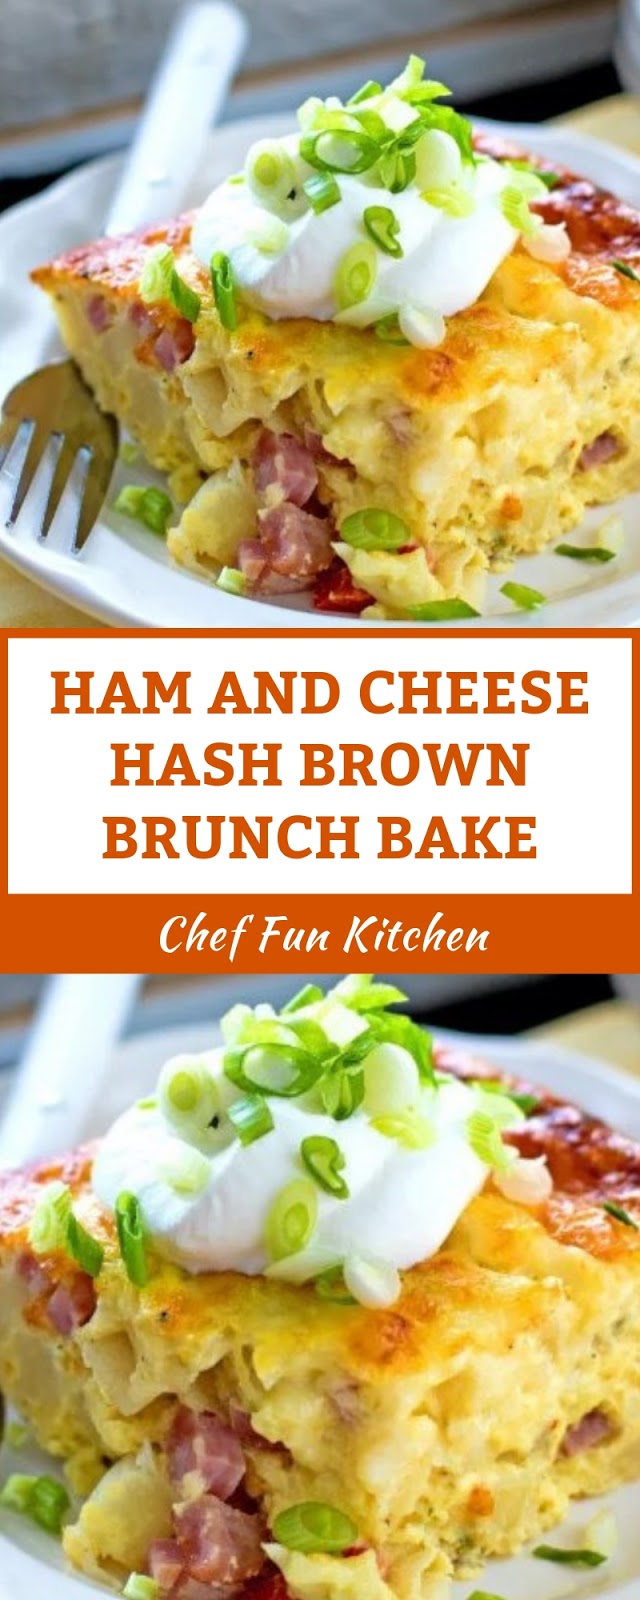 HAM AND CHEESE HASH BROWN BRUNCH BAKE